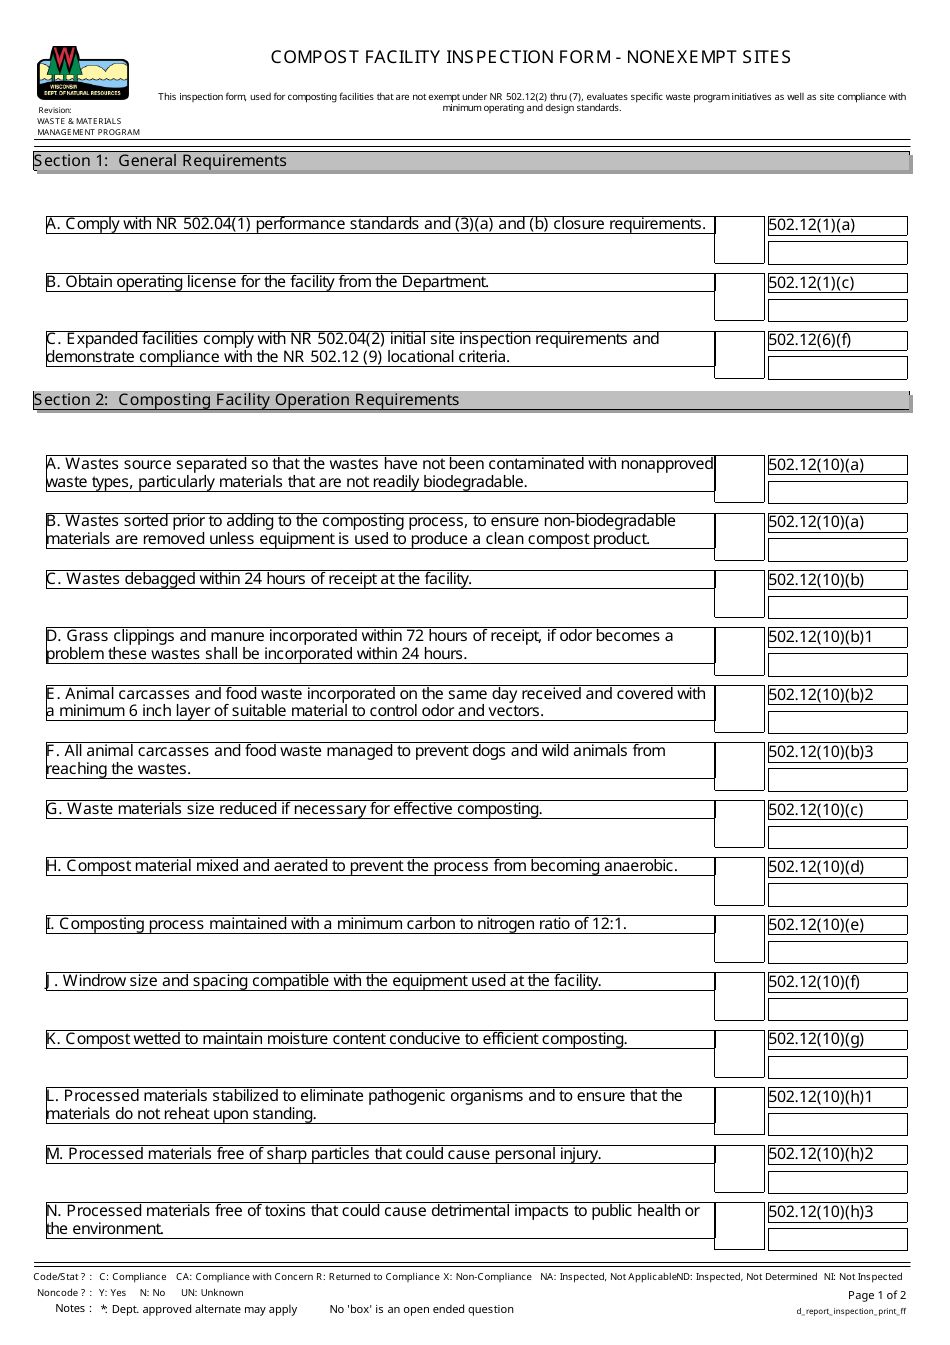 Compost Facility Inspection Form - Nonexempt Sites - Wisconsin, Page 1